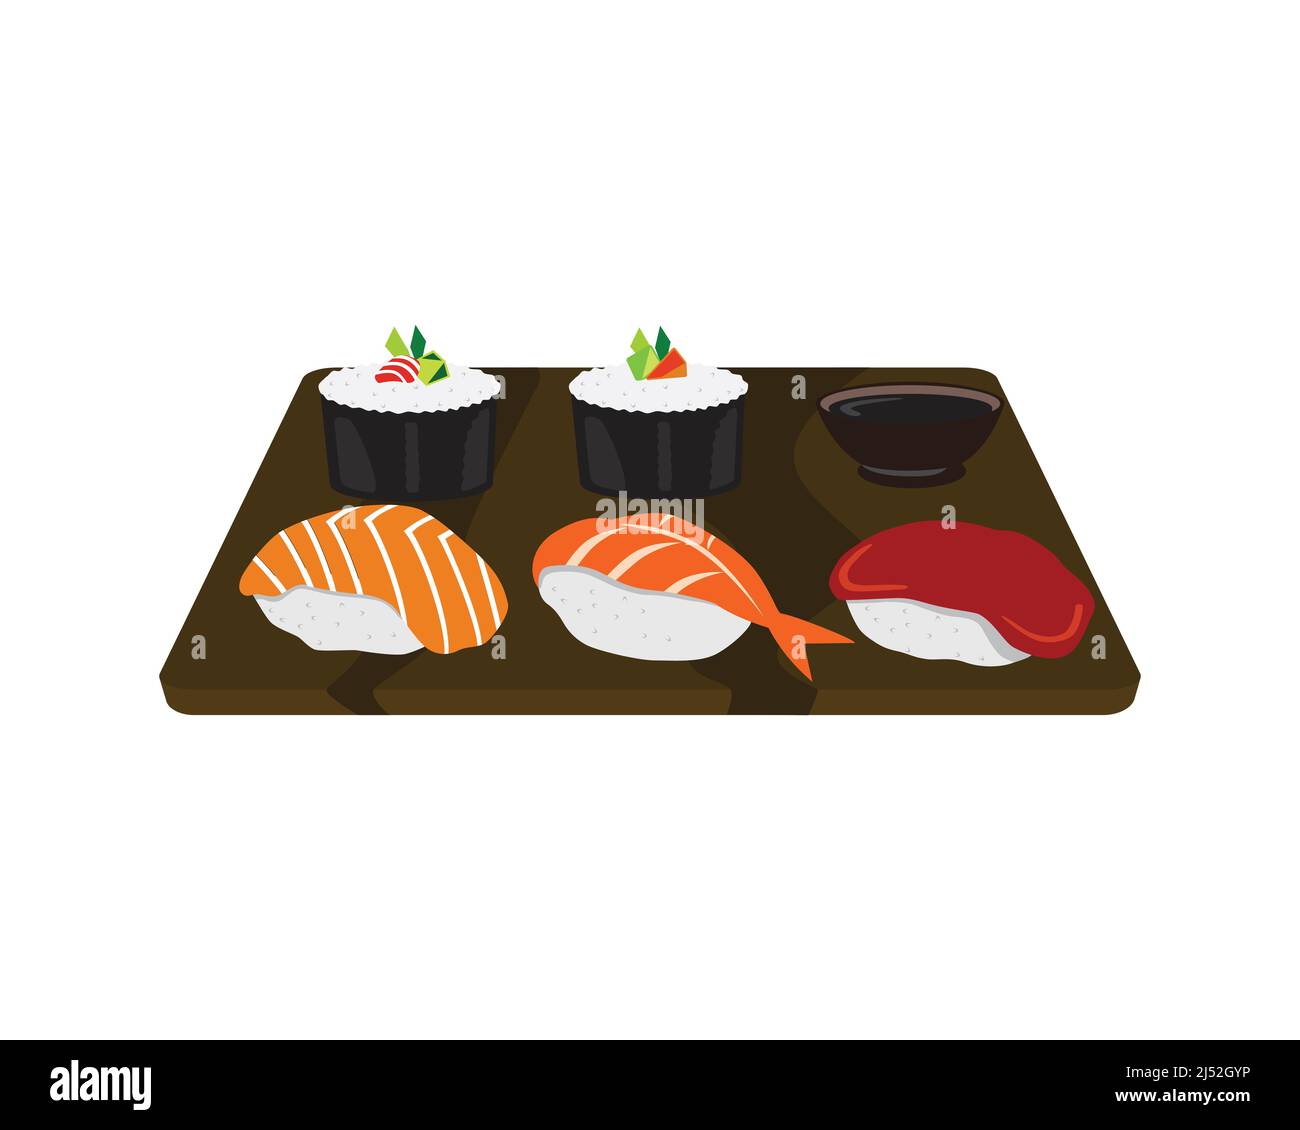 Sushi on the Wooden Plate Illustration Vector Stock Vector